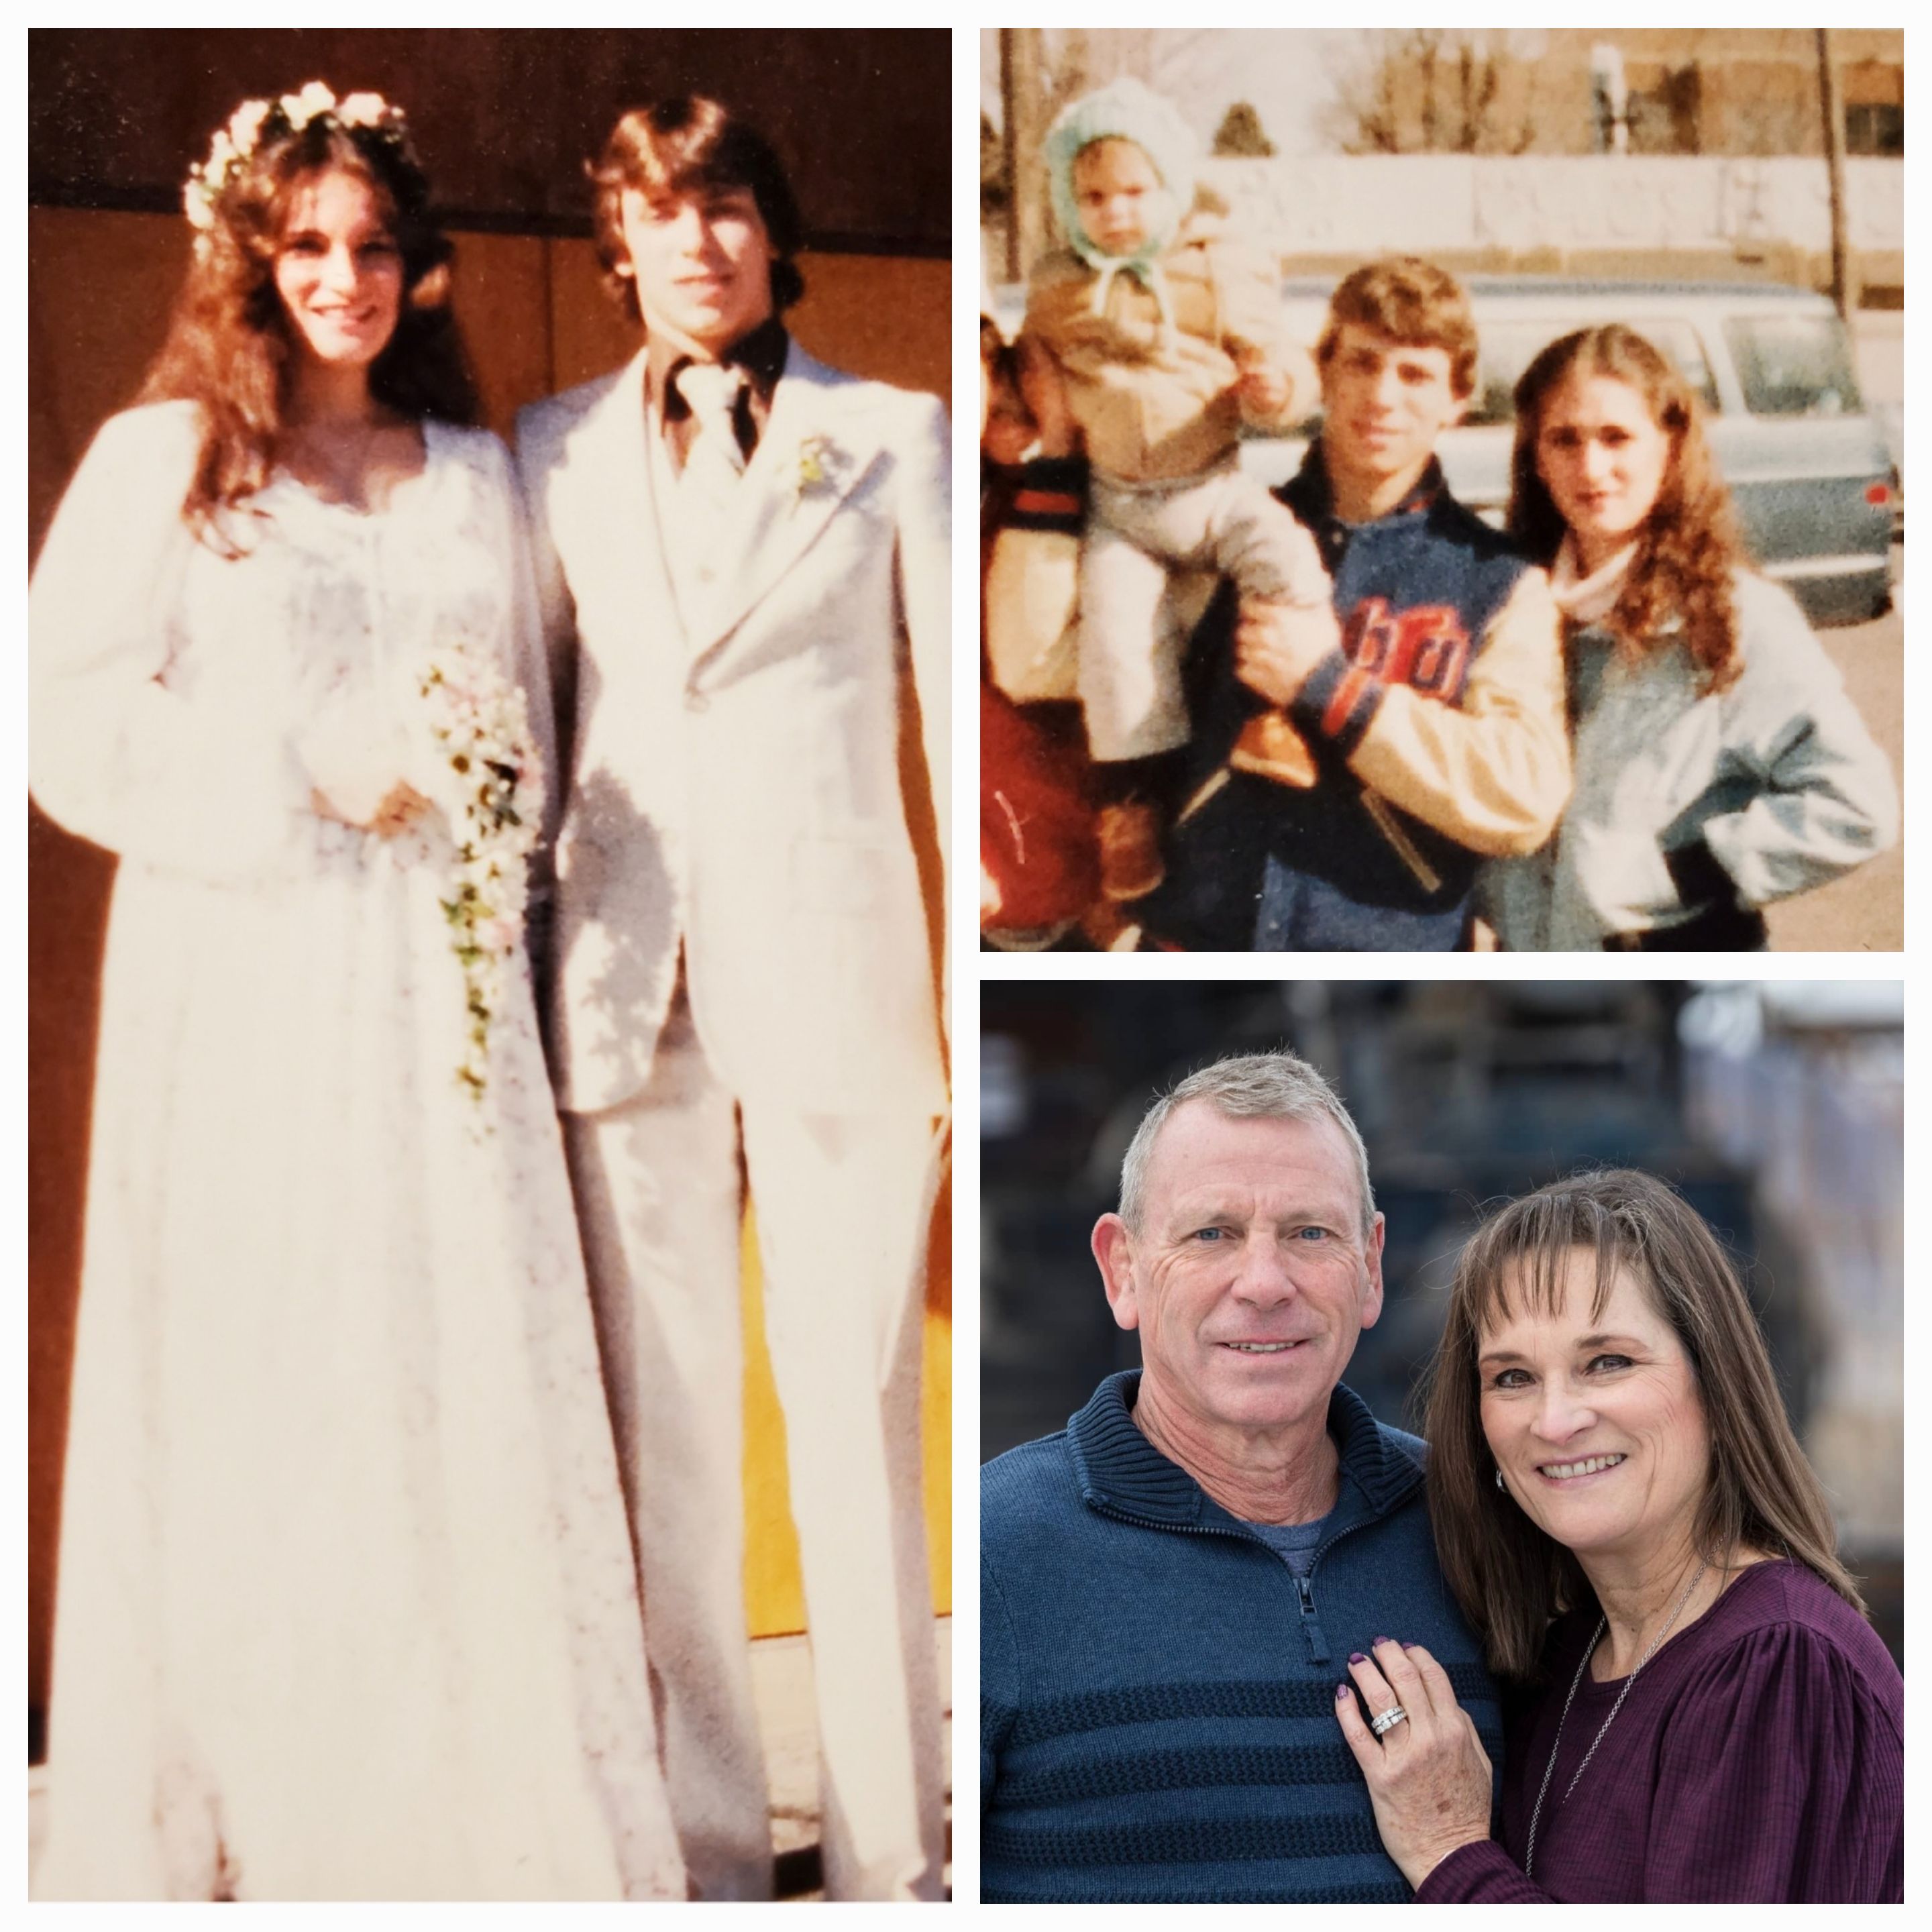 Scott and Lisa Barrett, on wedding day, with their child, and now